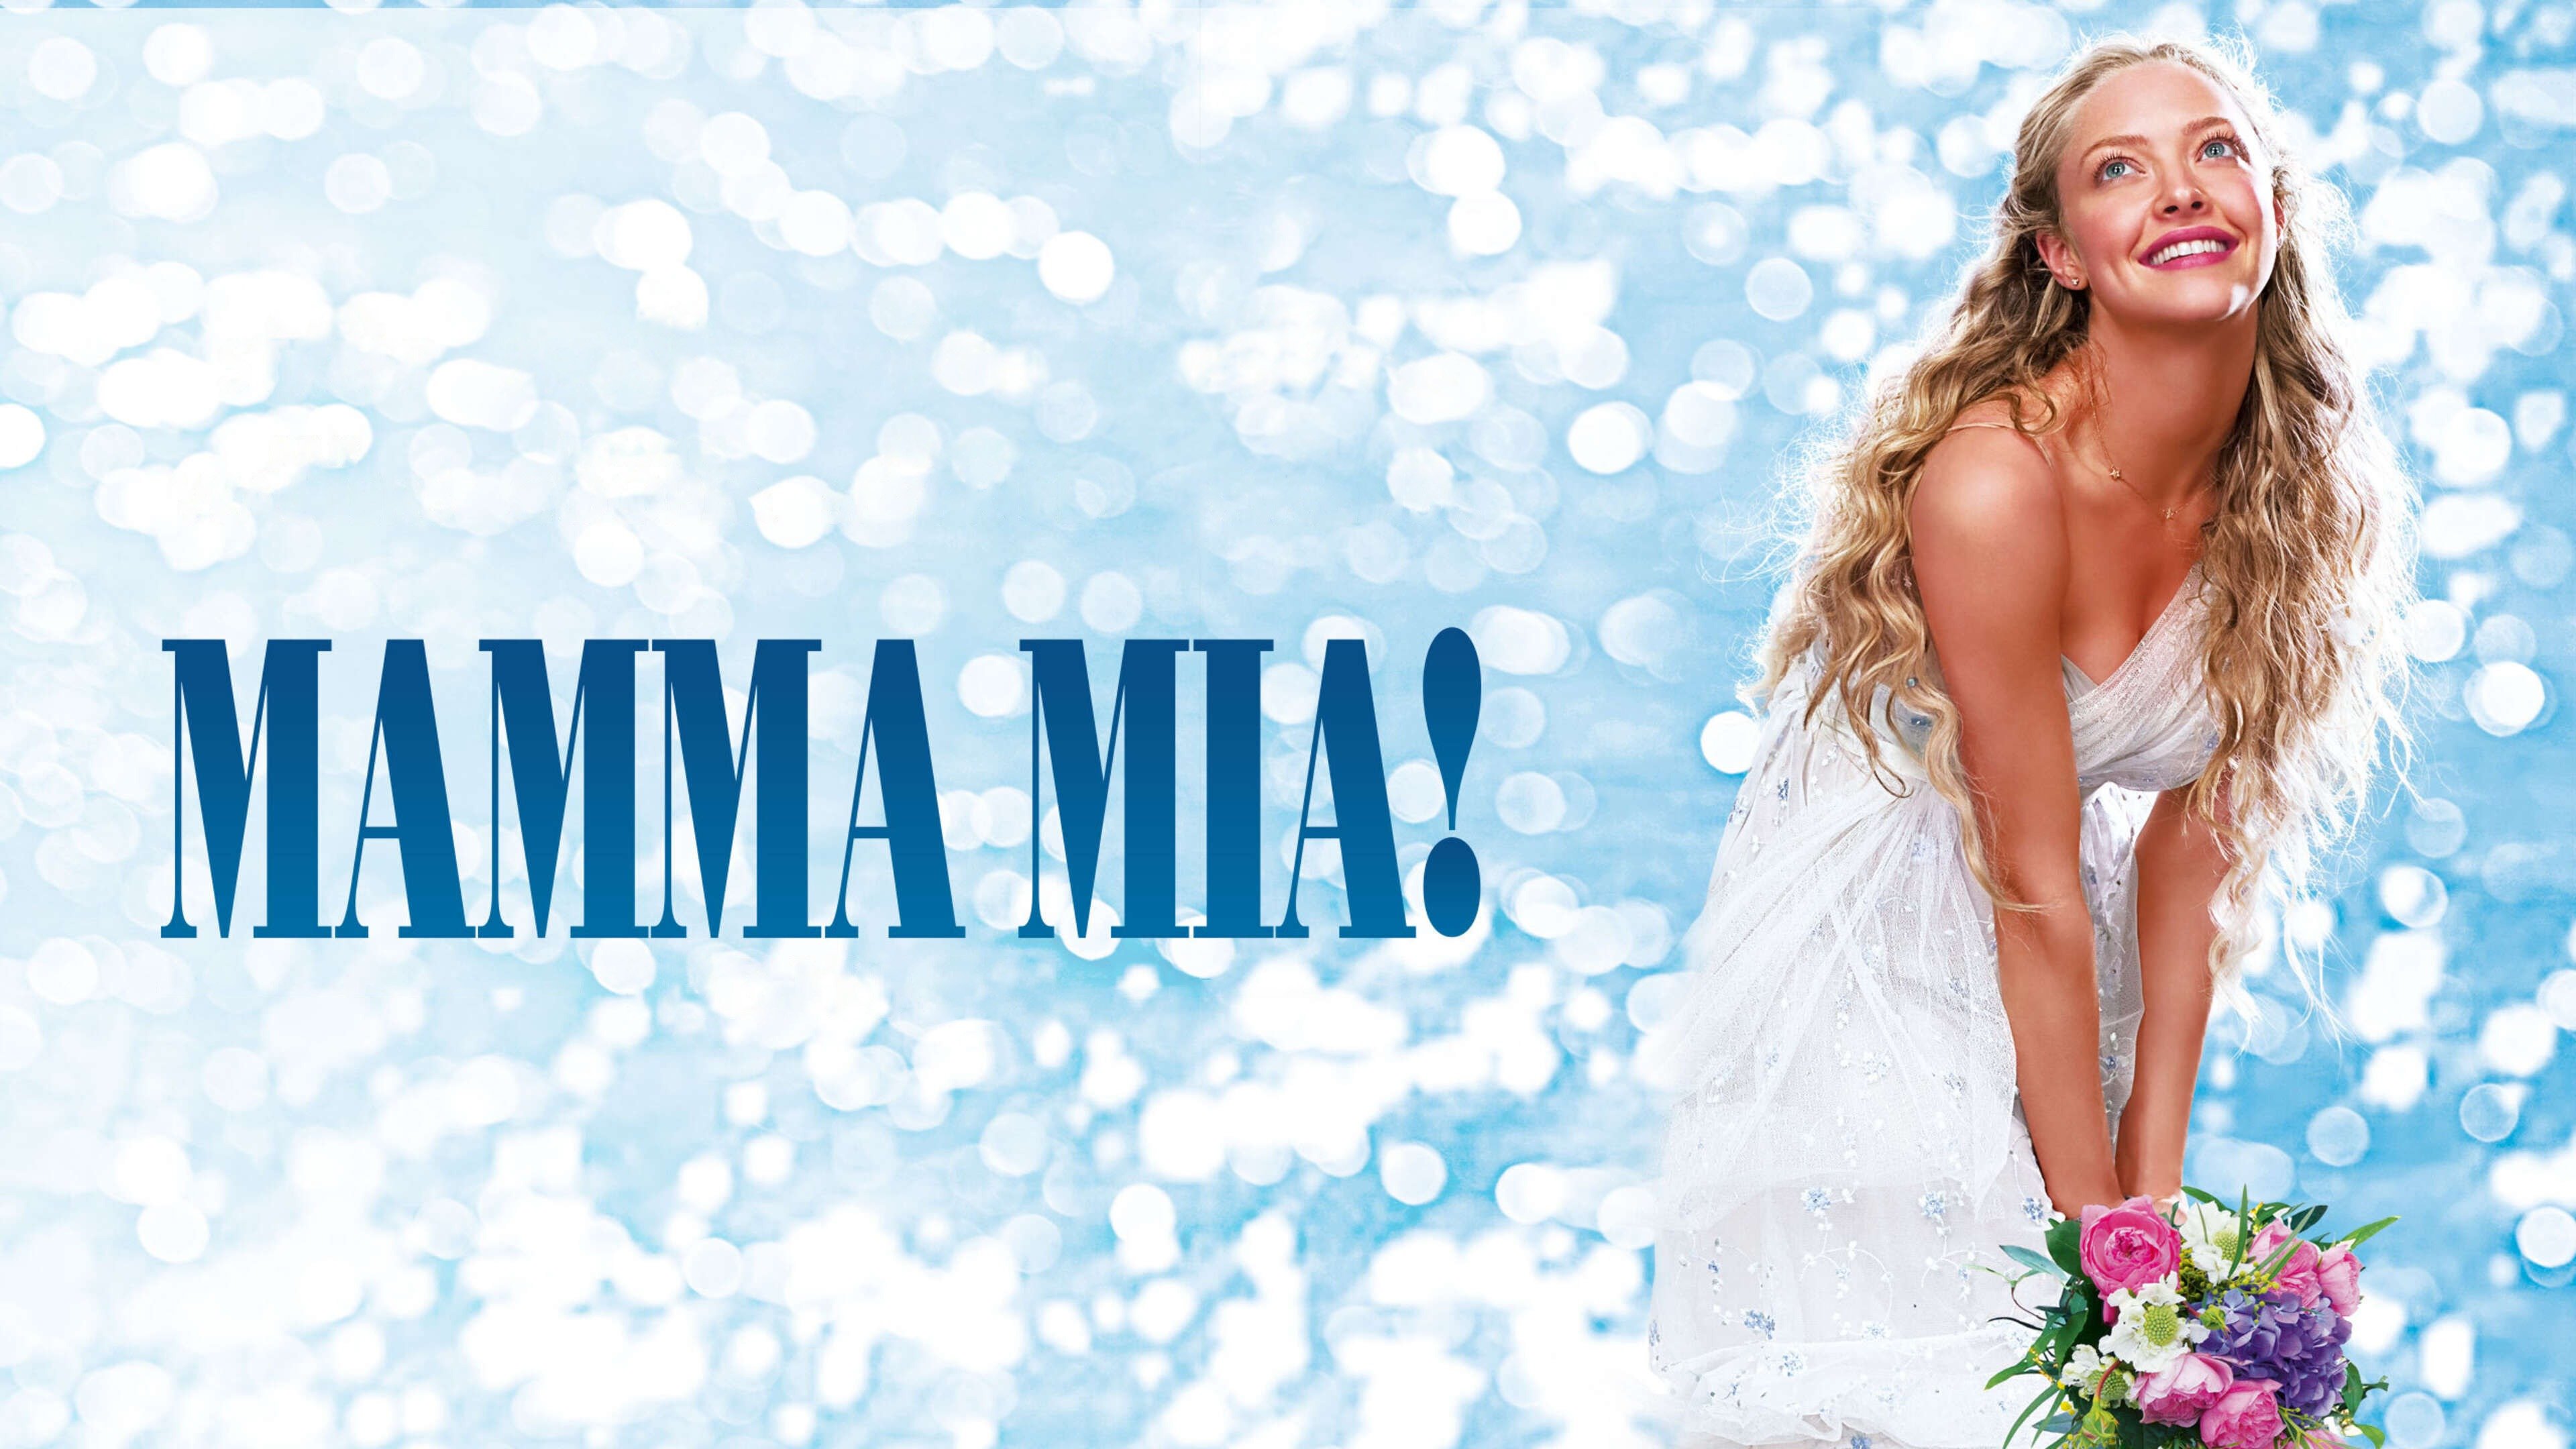 Francis Parker Theater Arts Presents Mamma Mia  Francis Parker   Independent Private School in Louisville KY